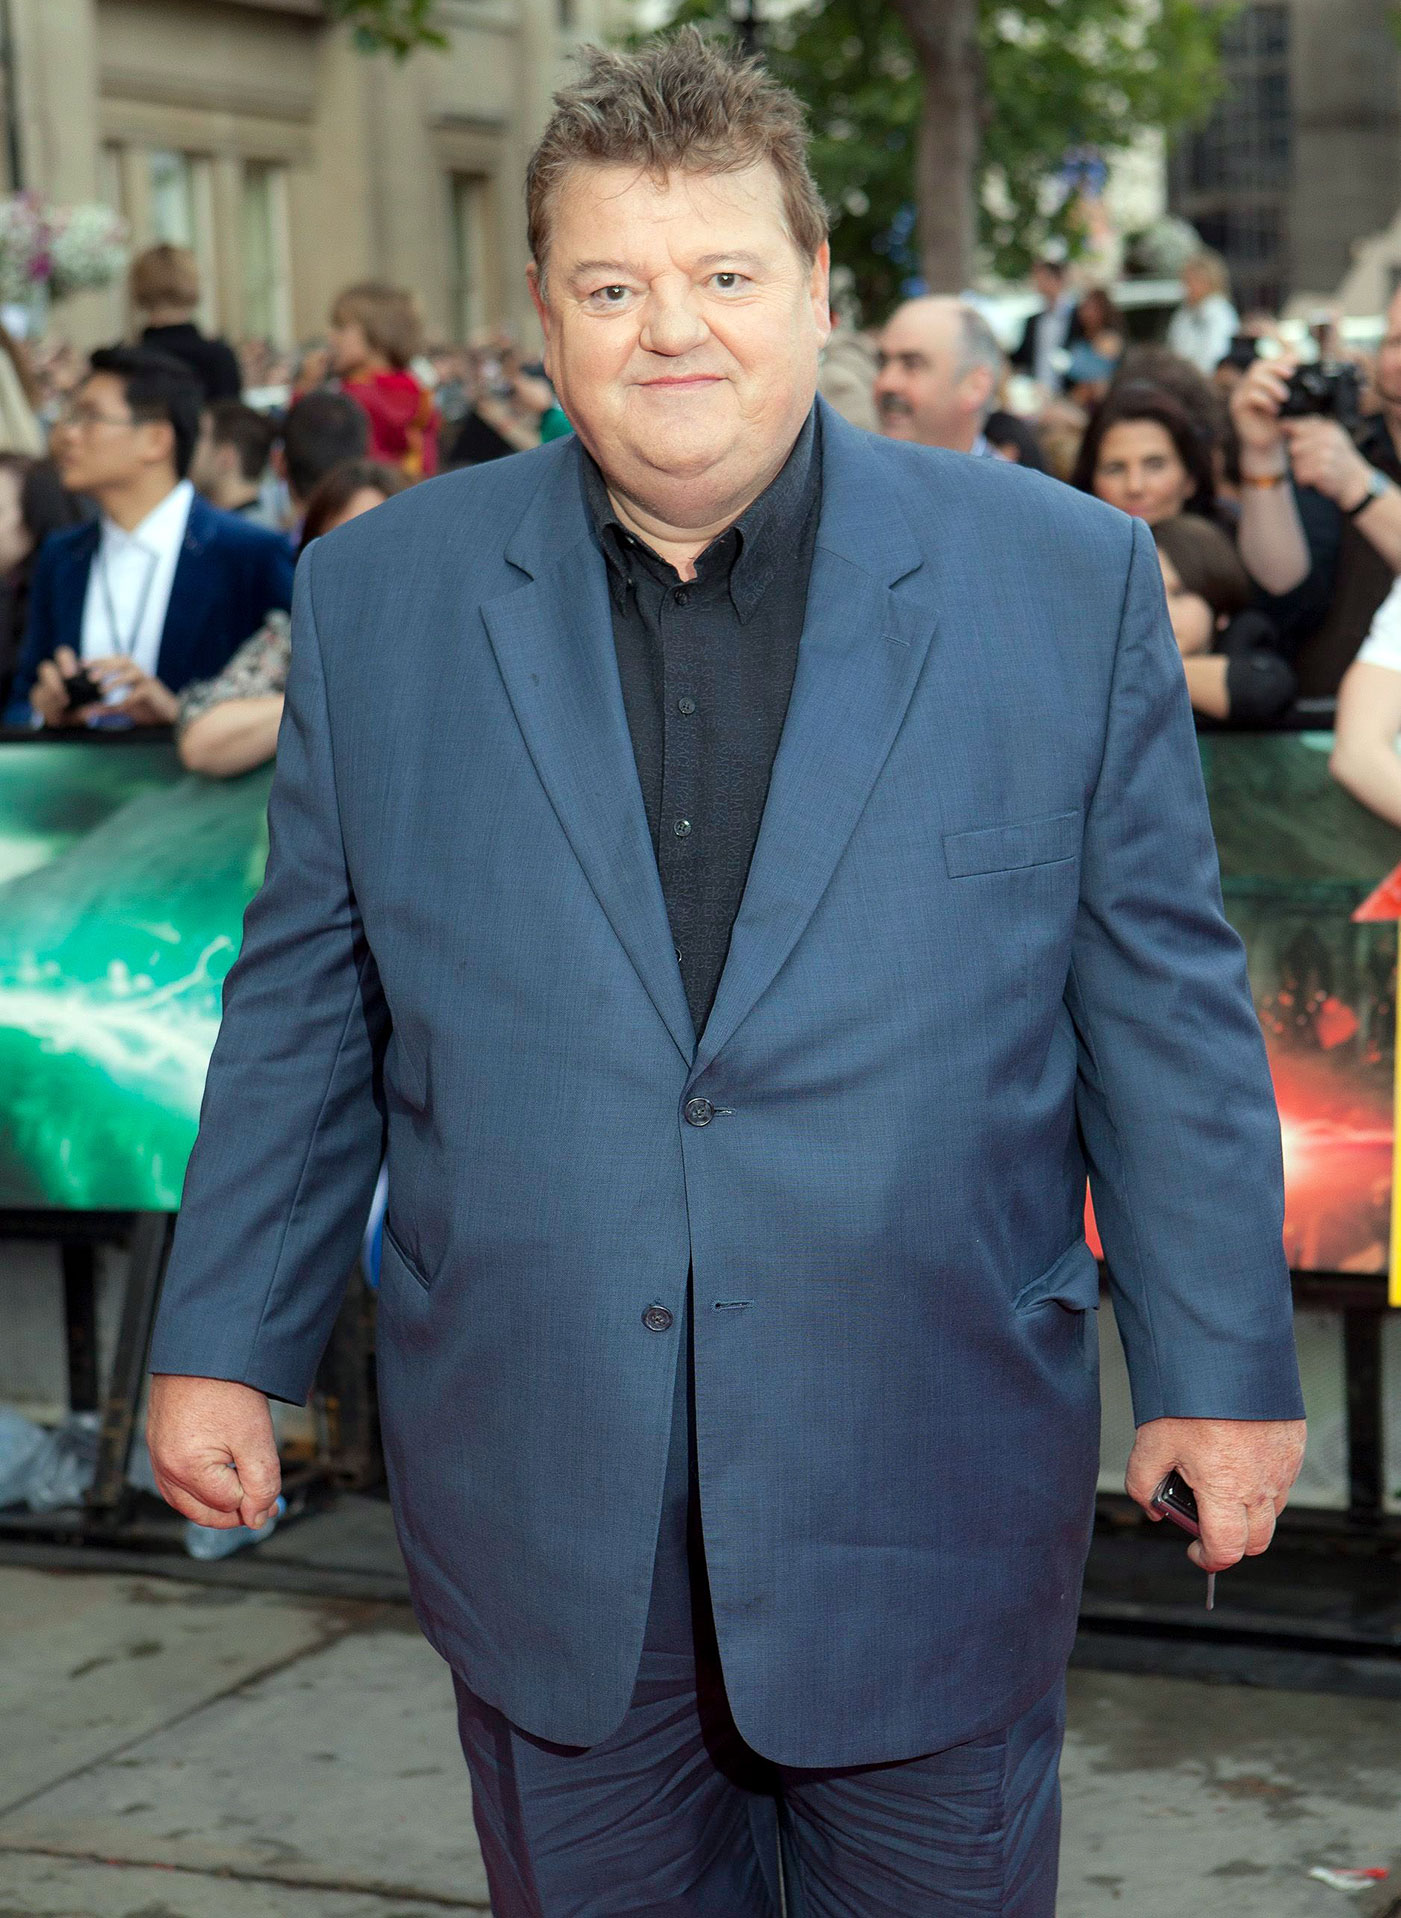 Robbie Coltrane What the Harry Potter Cast Has Said About Where They Stand With JK Rowling